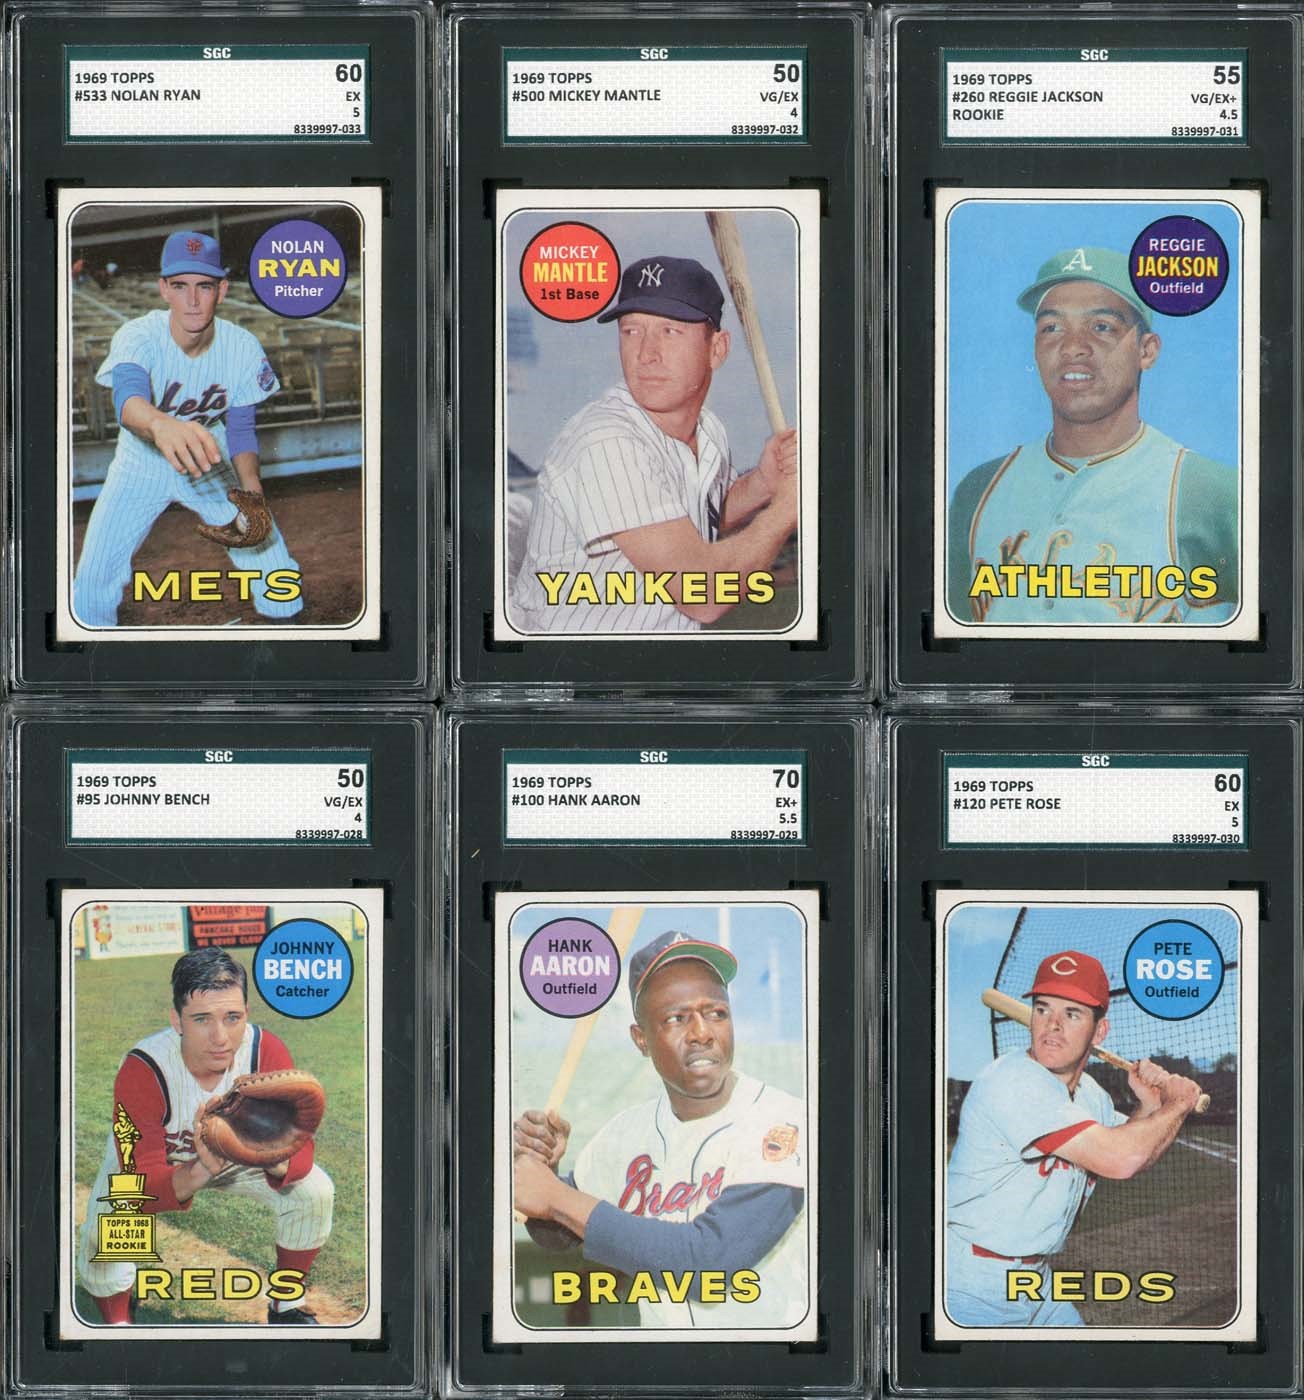 - 1969 Topps Complete Set of 664 cards with (6) SGC Graded